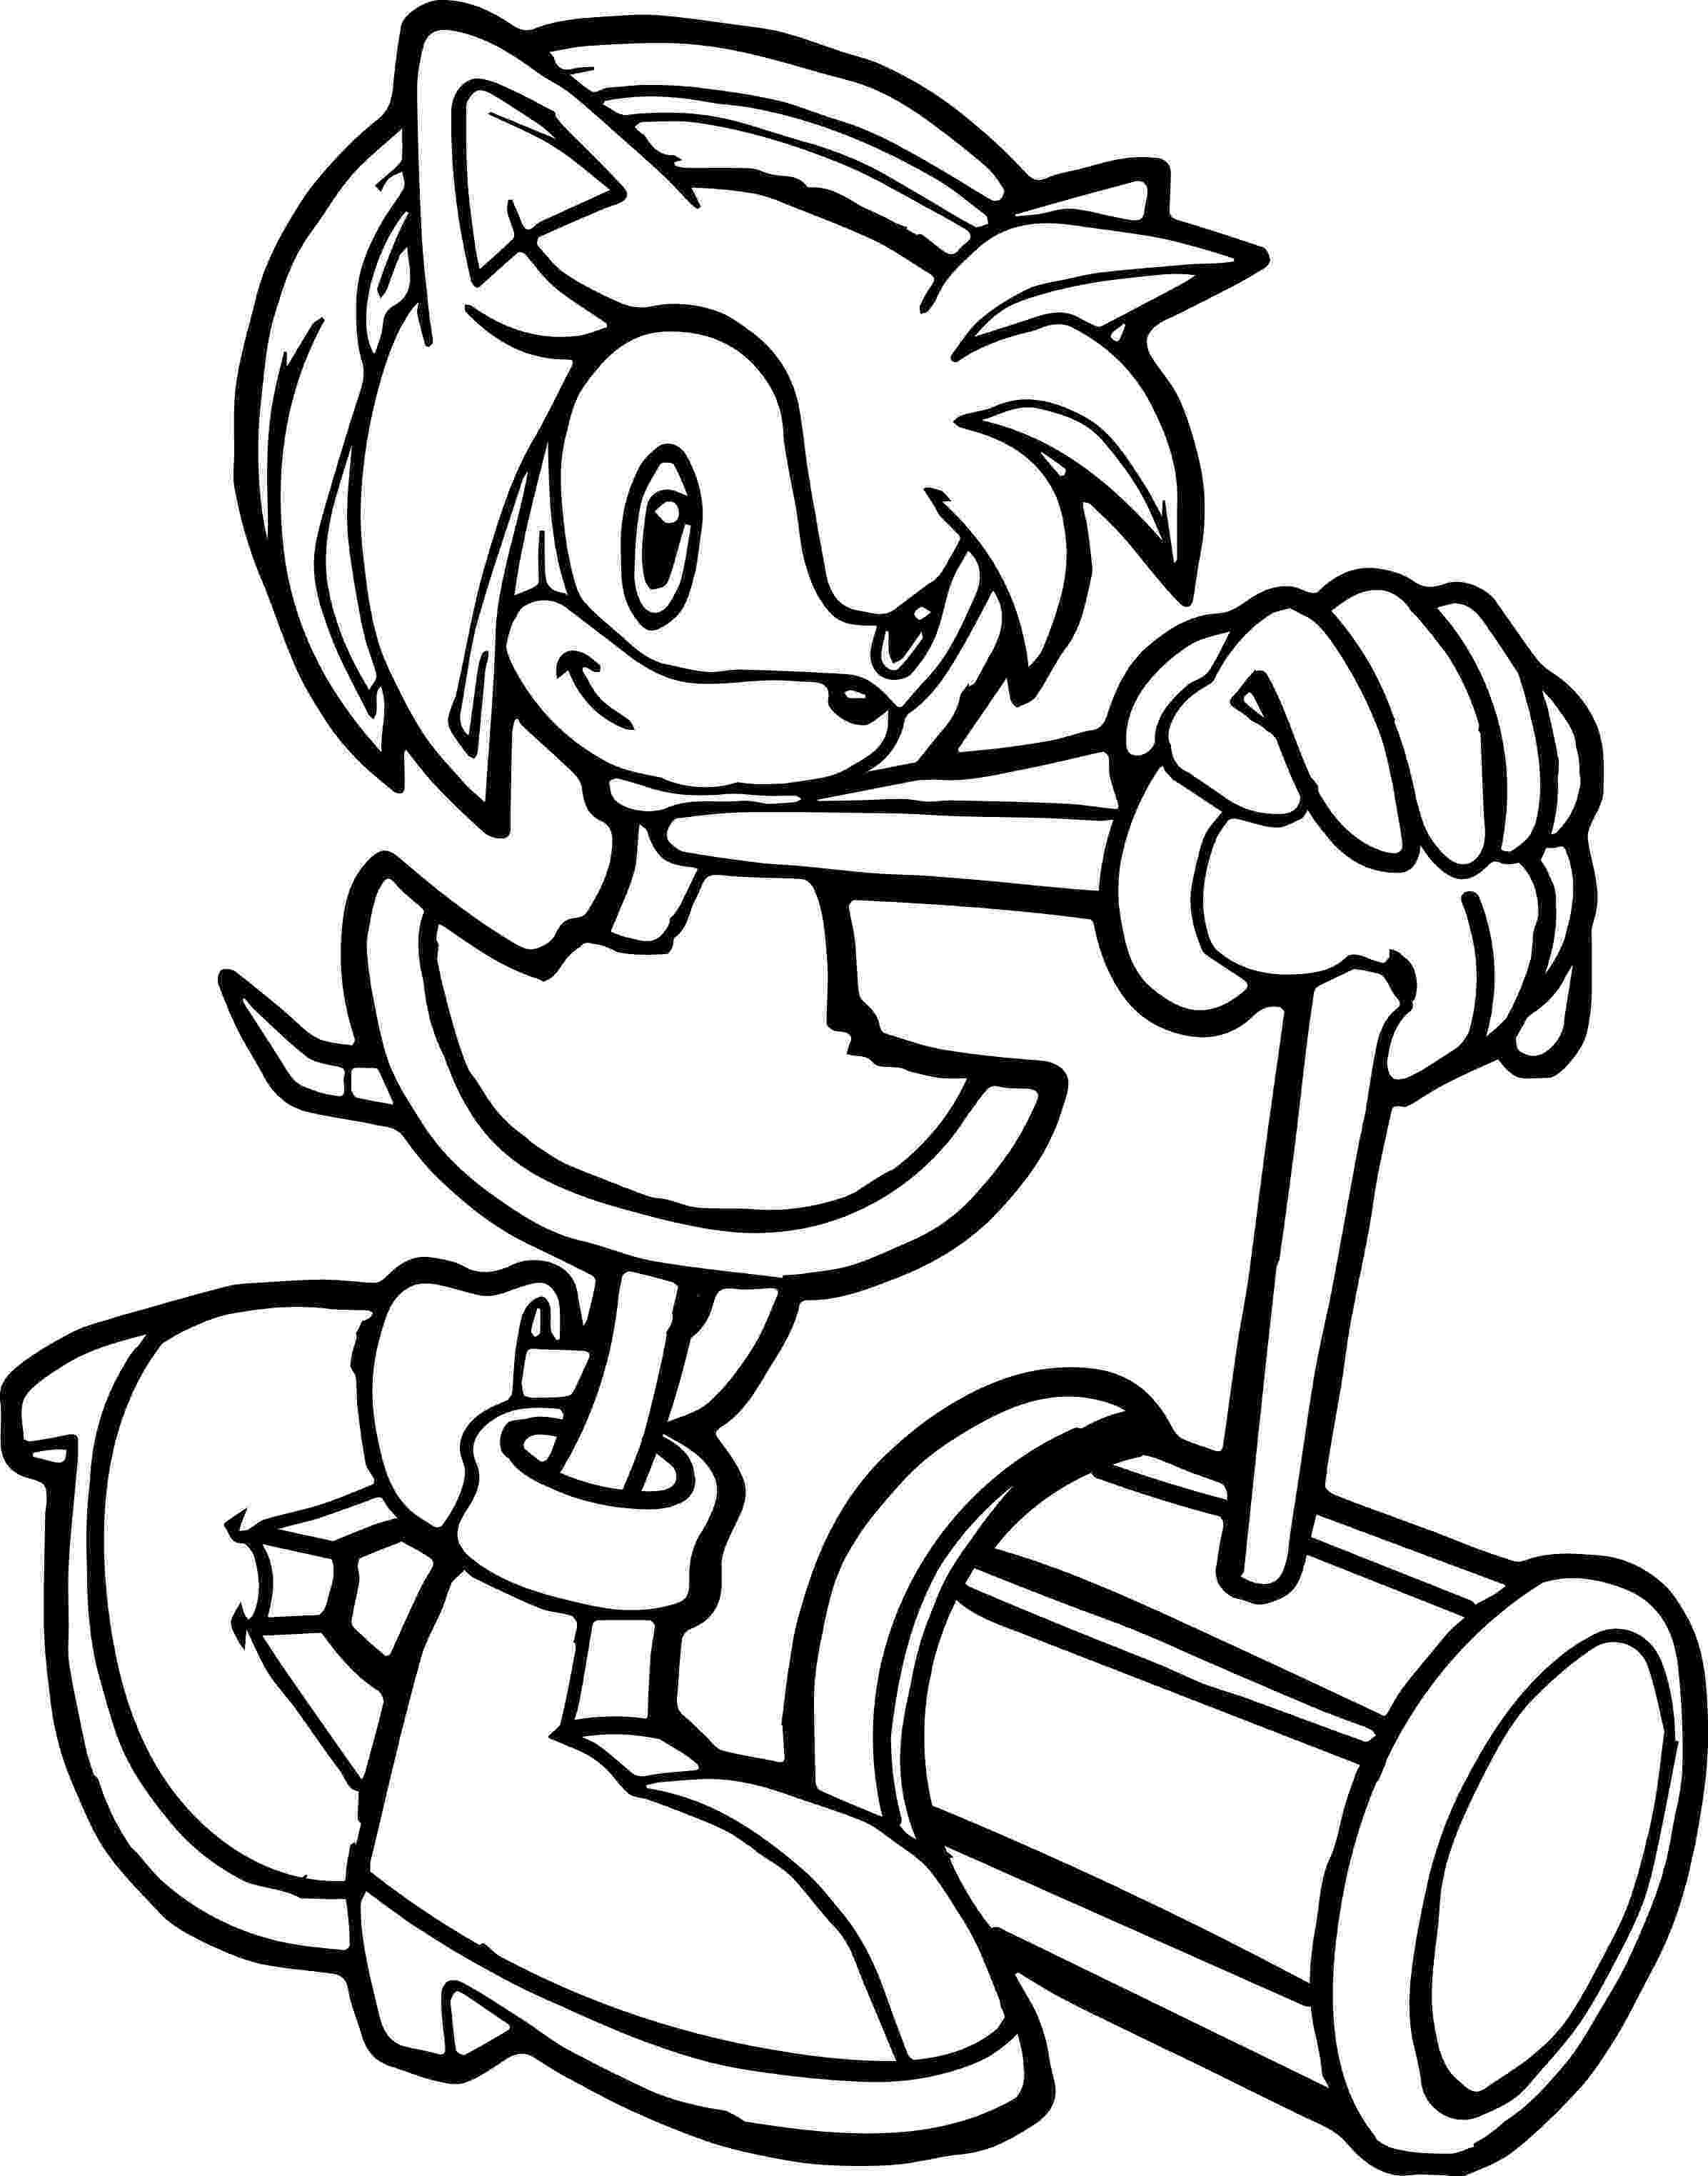 amy rose coloring pages three amy rose coloring page wecoloringpagecom pages rose coloring amy 